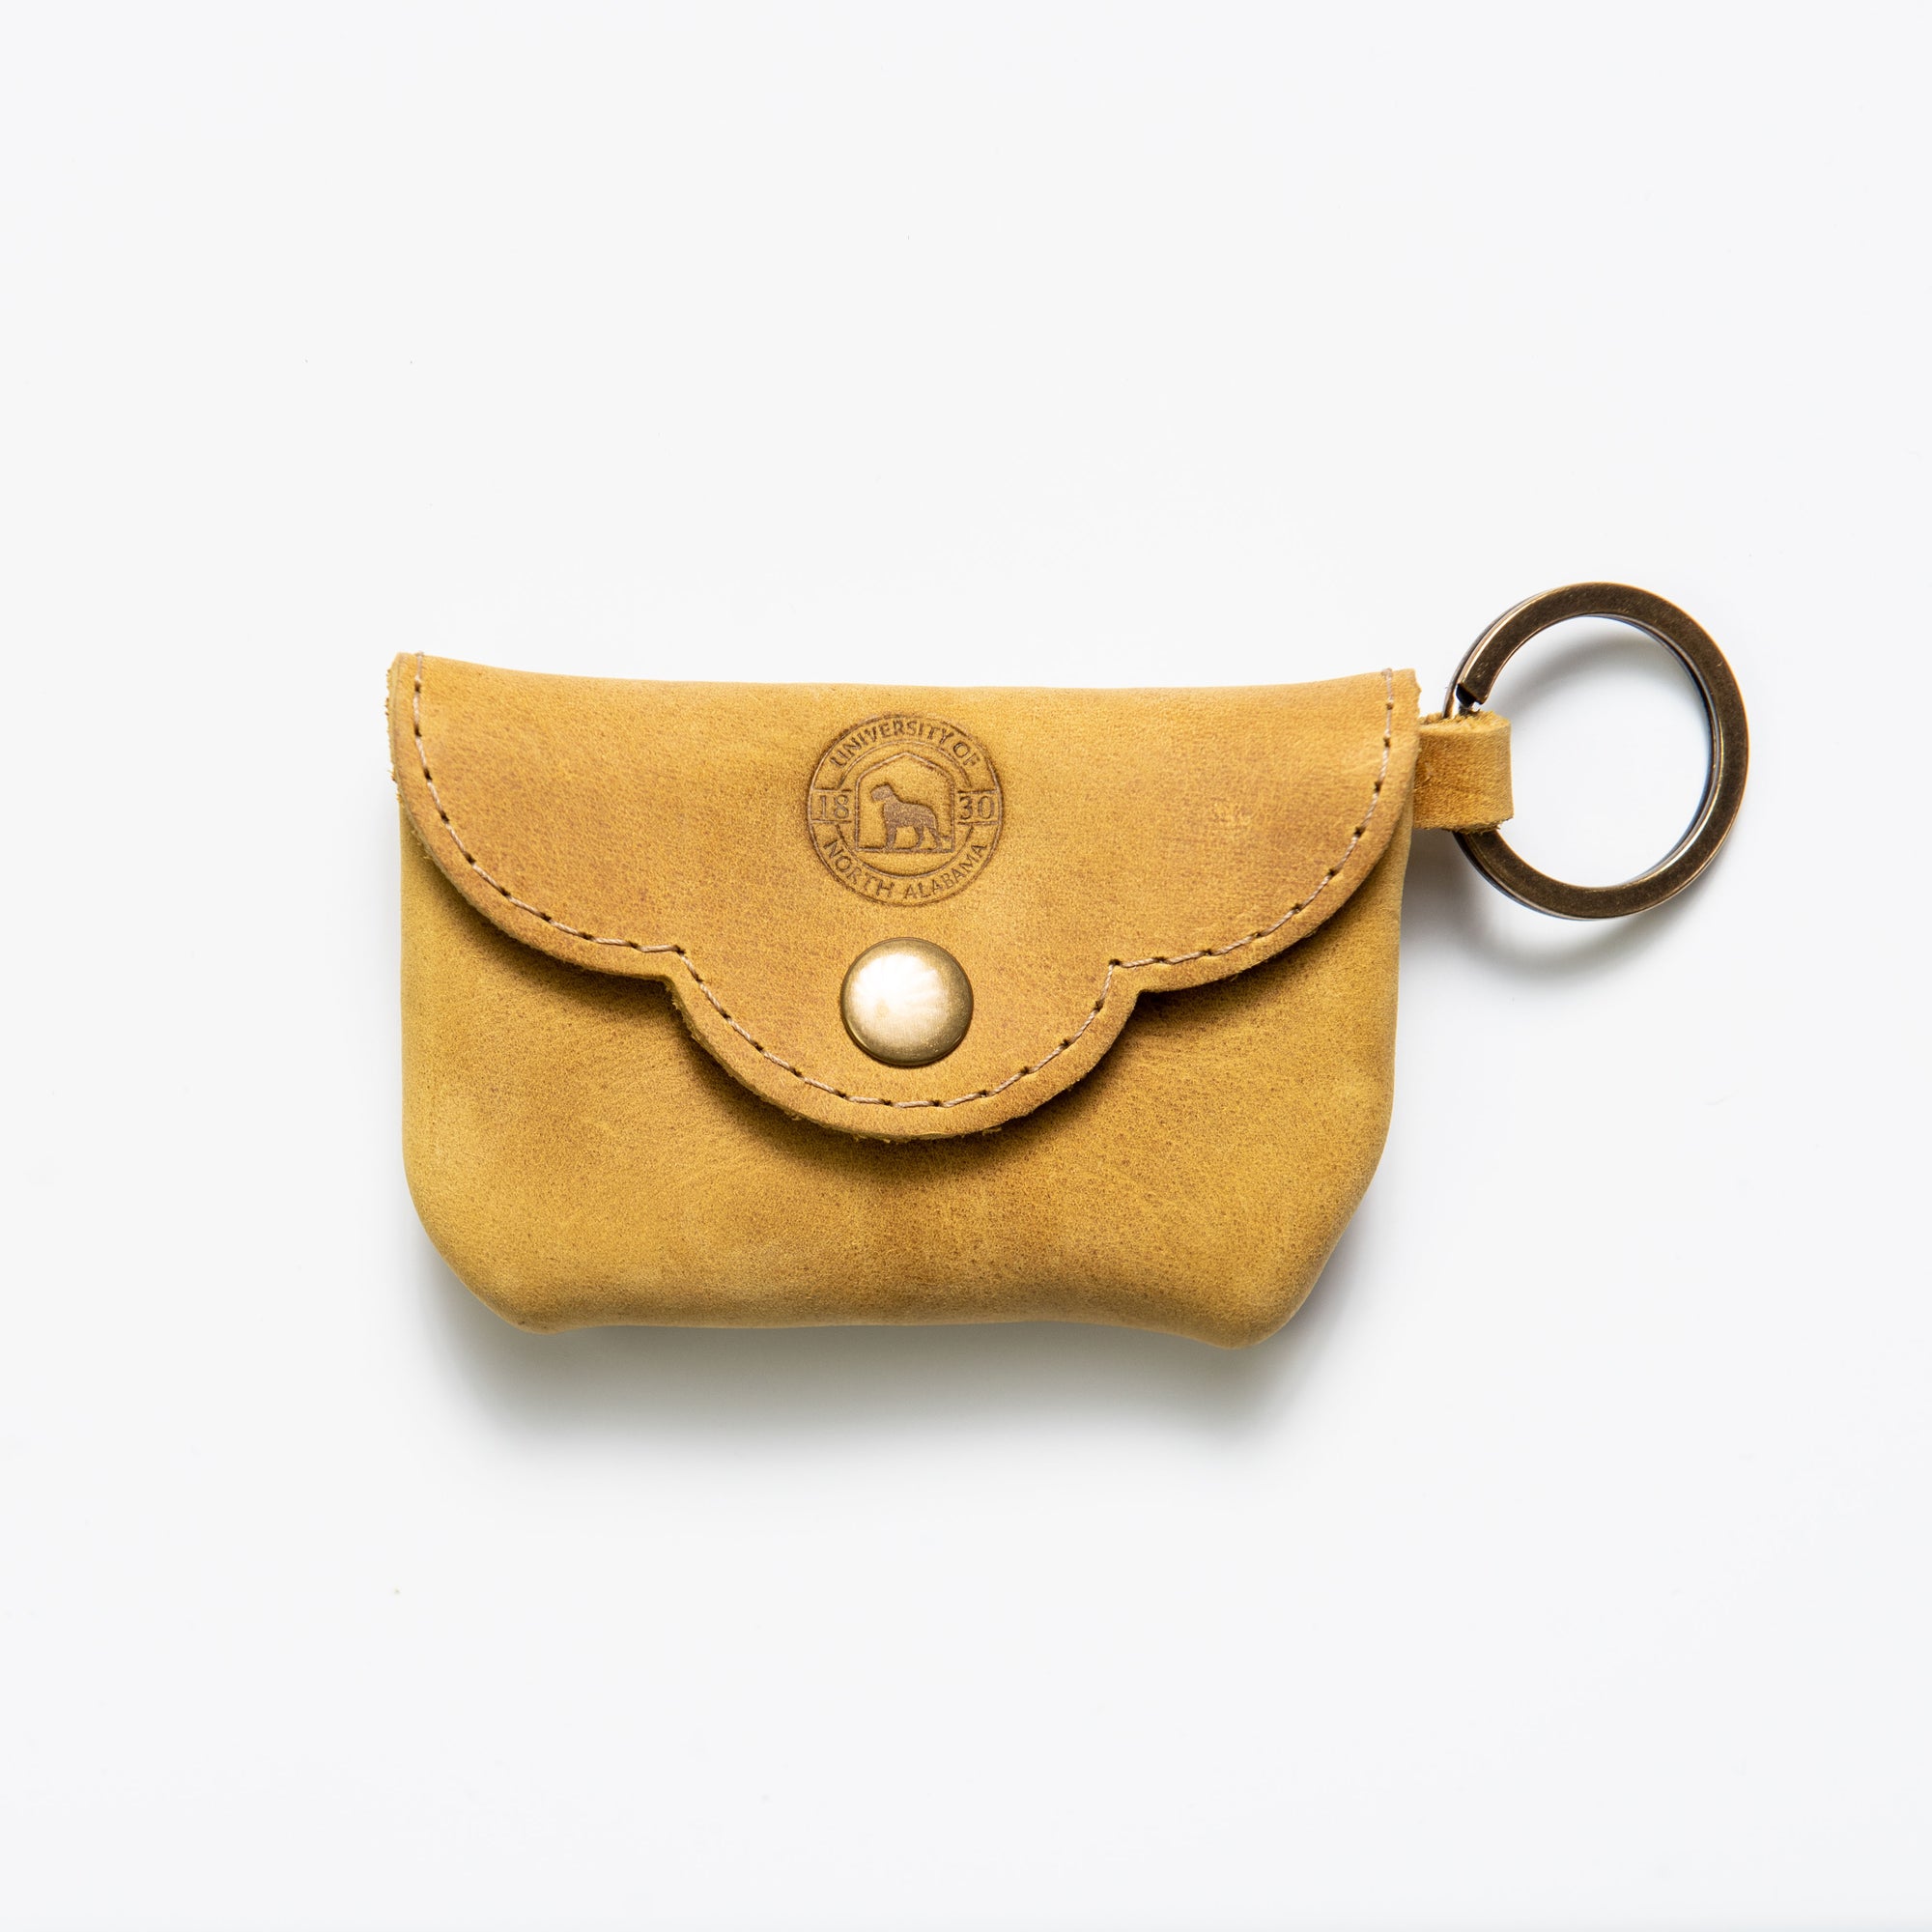 Fine leather scallop keychain wallet with University of North Alabama (UNA) logo